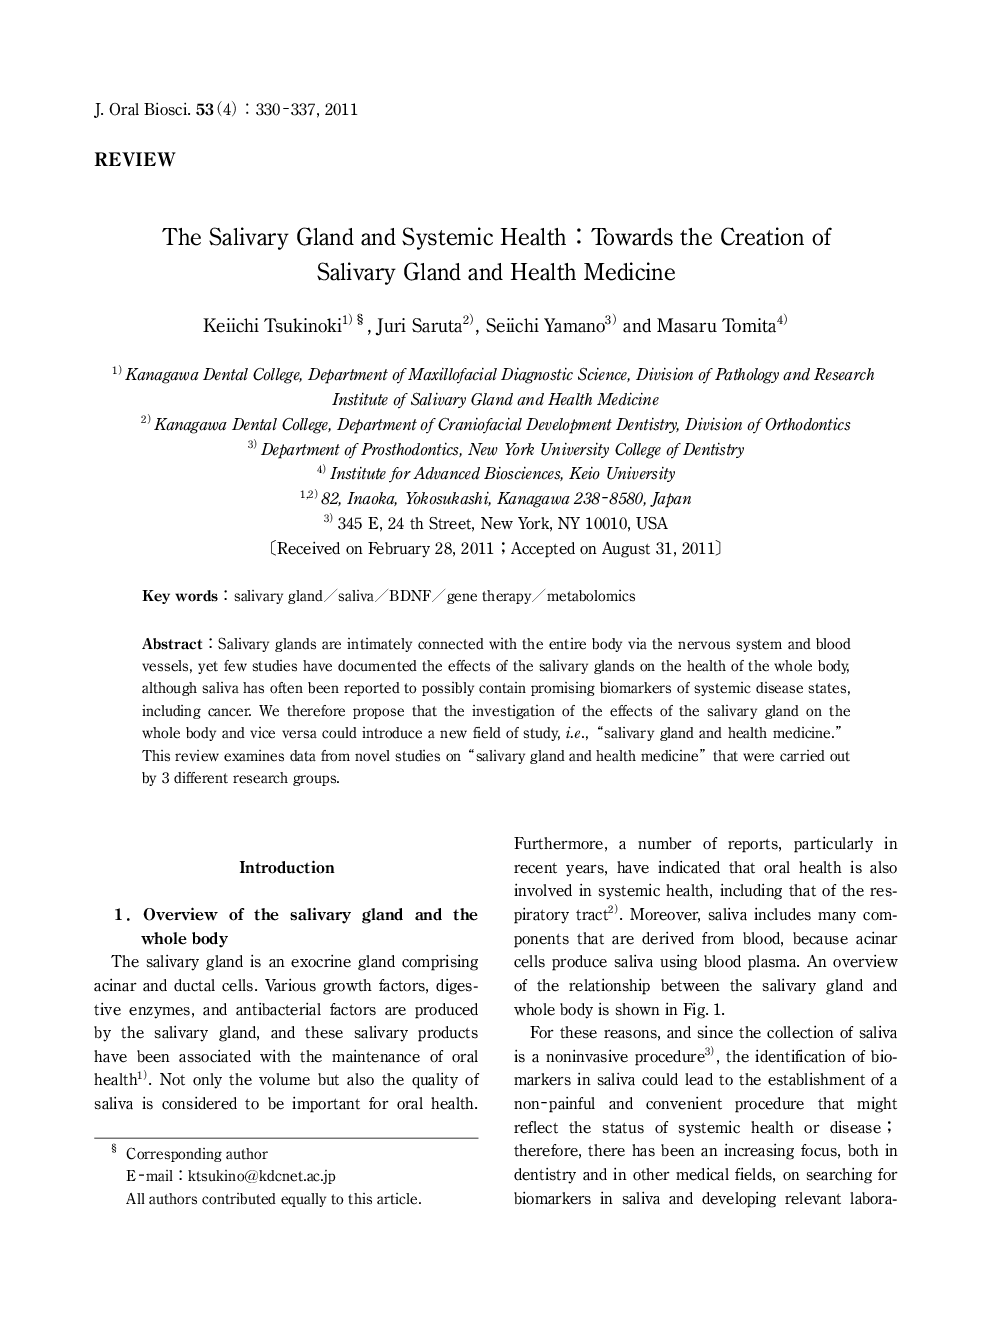 The Salivary Gland and Systemic Health: Towards the Creation of Salivary Gland and Health Medicine